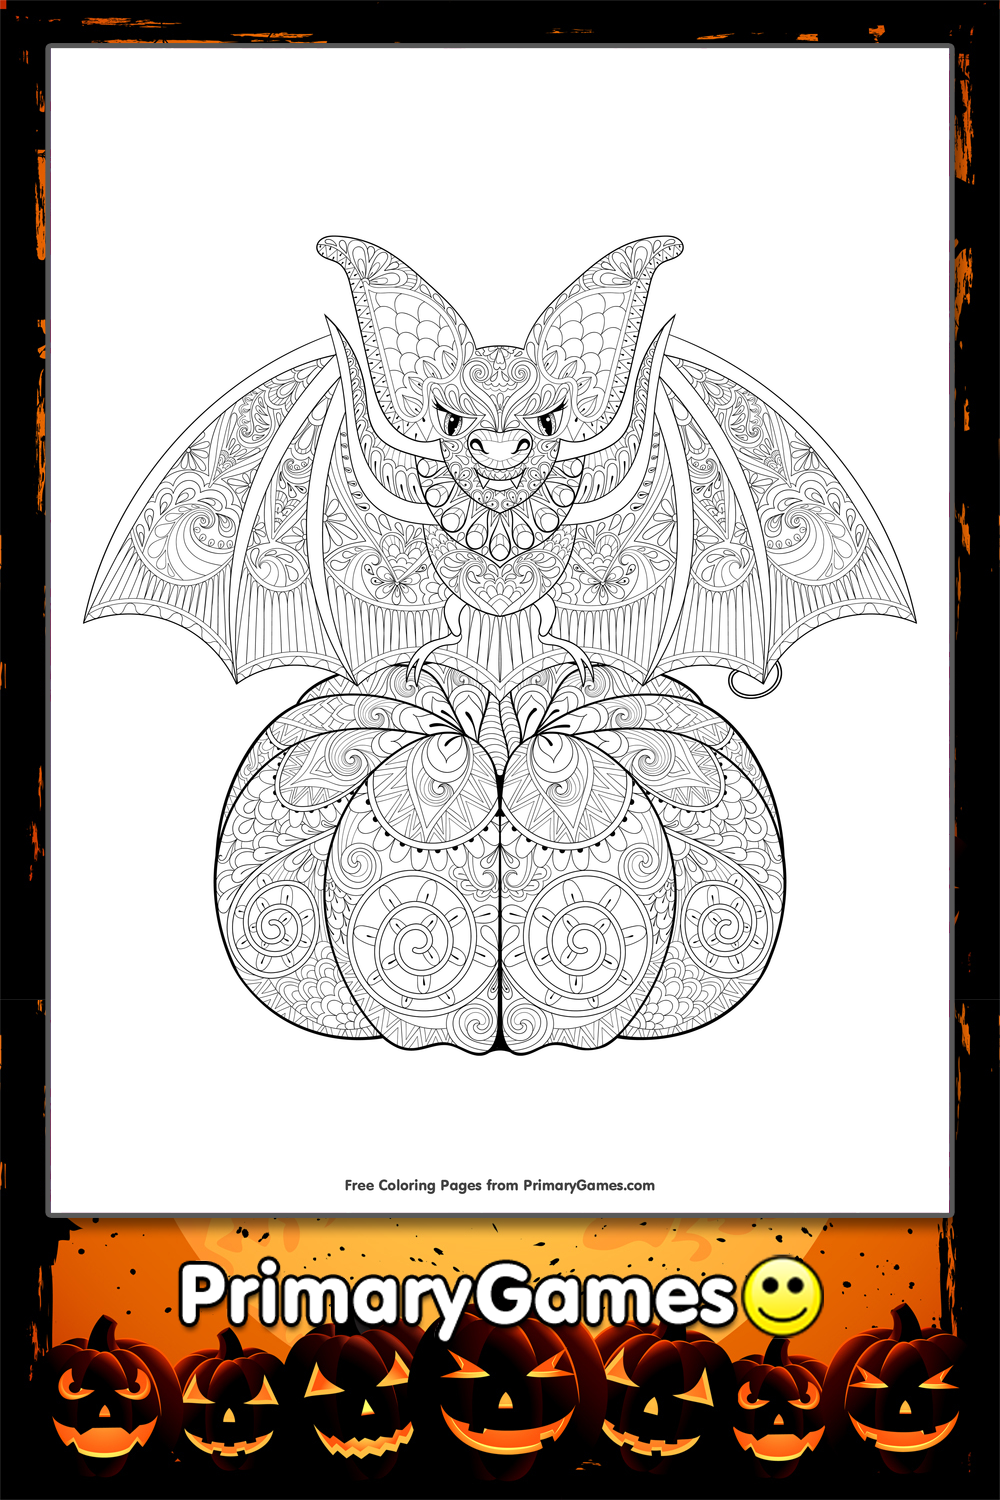 dot to dot coloring pages bats